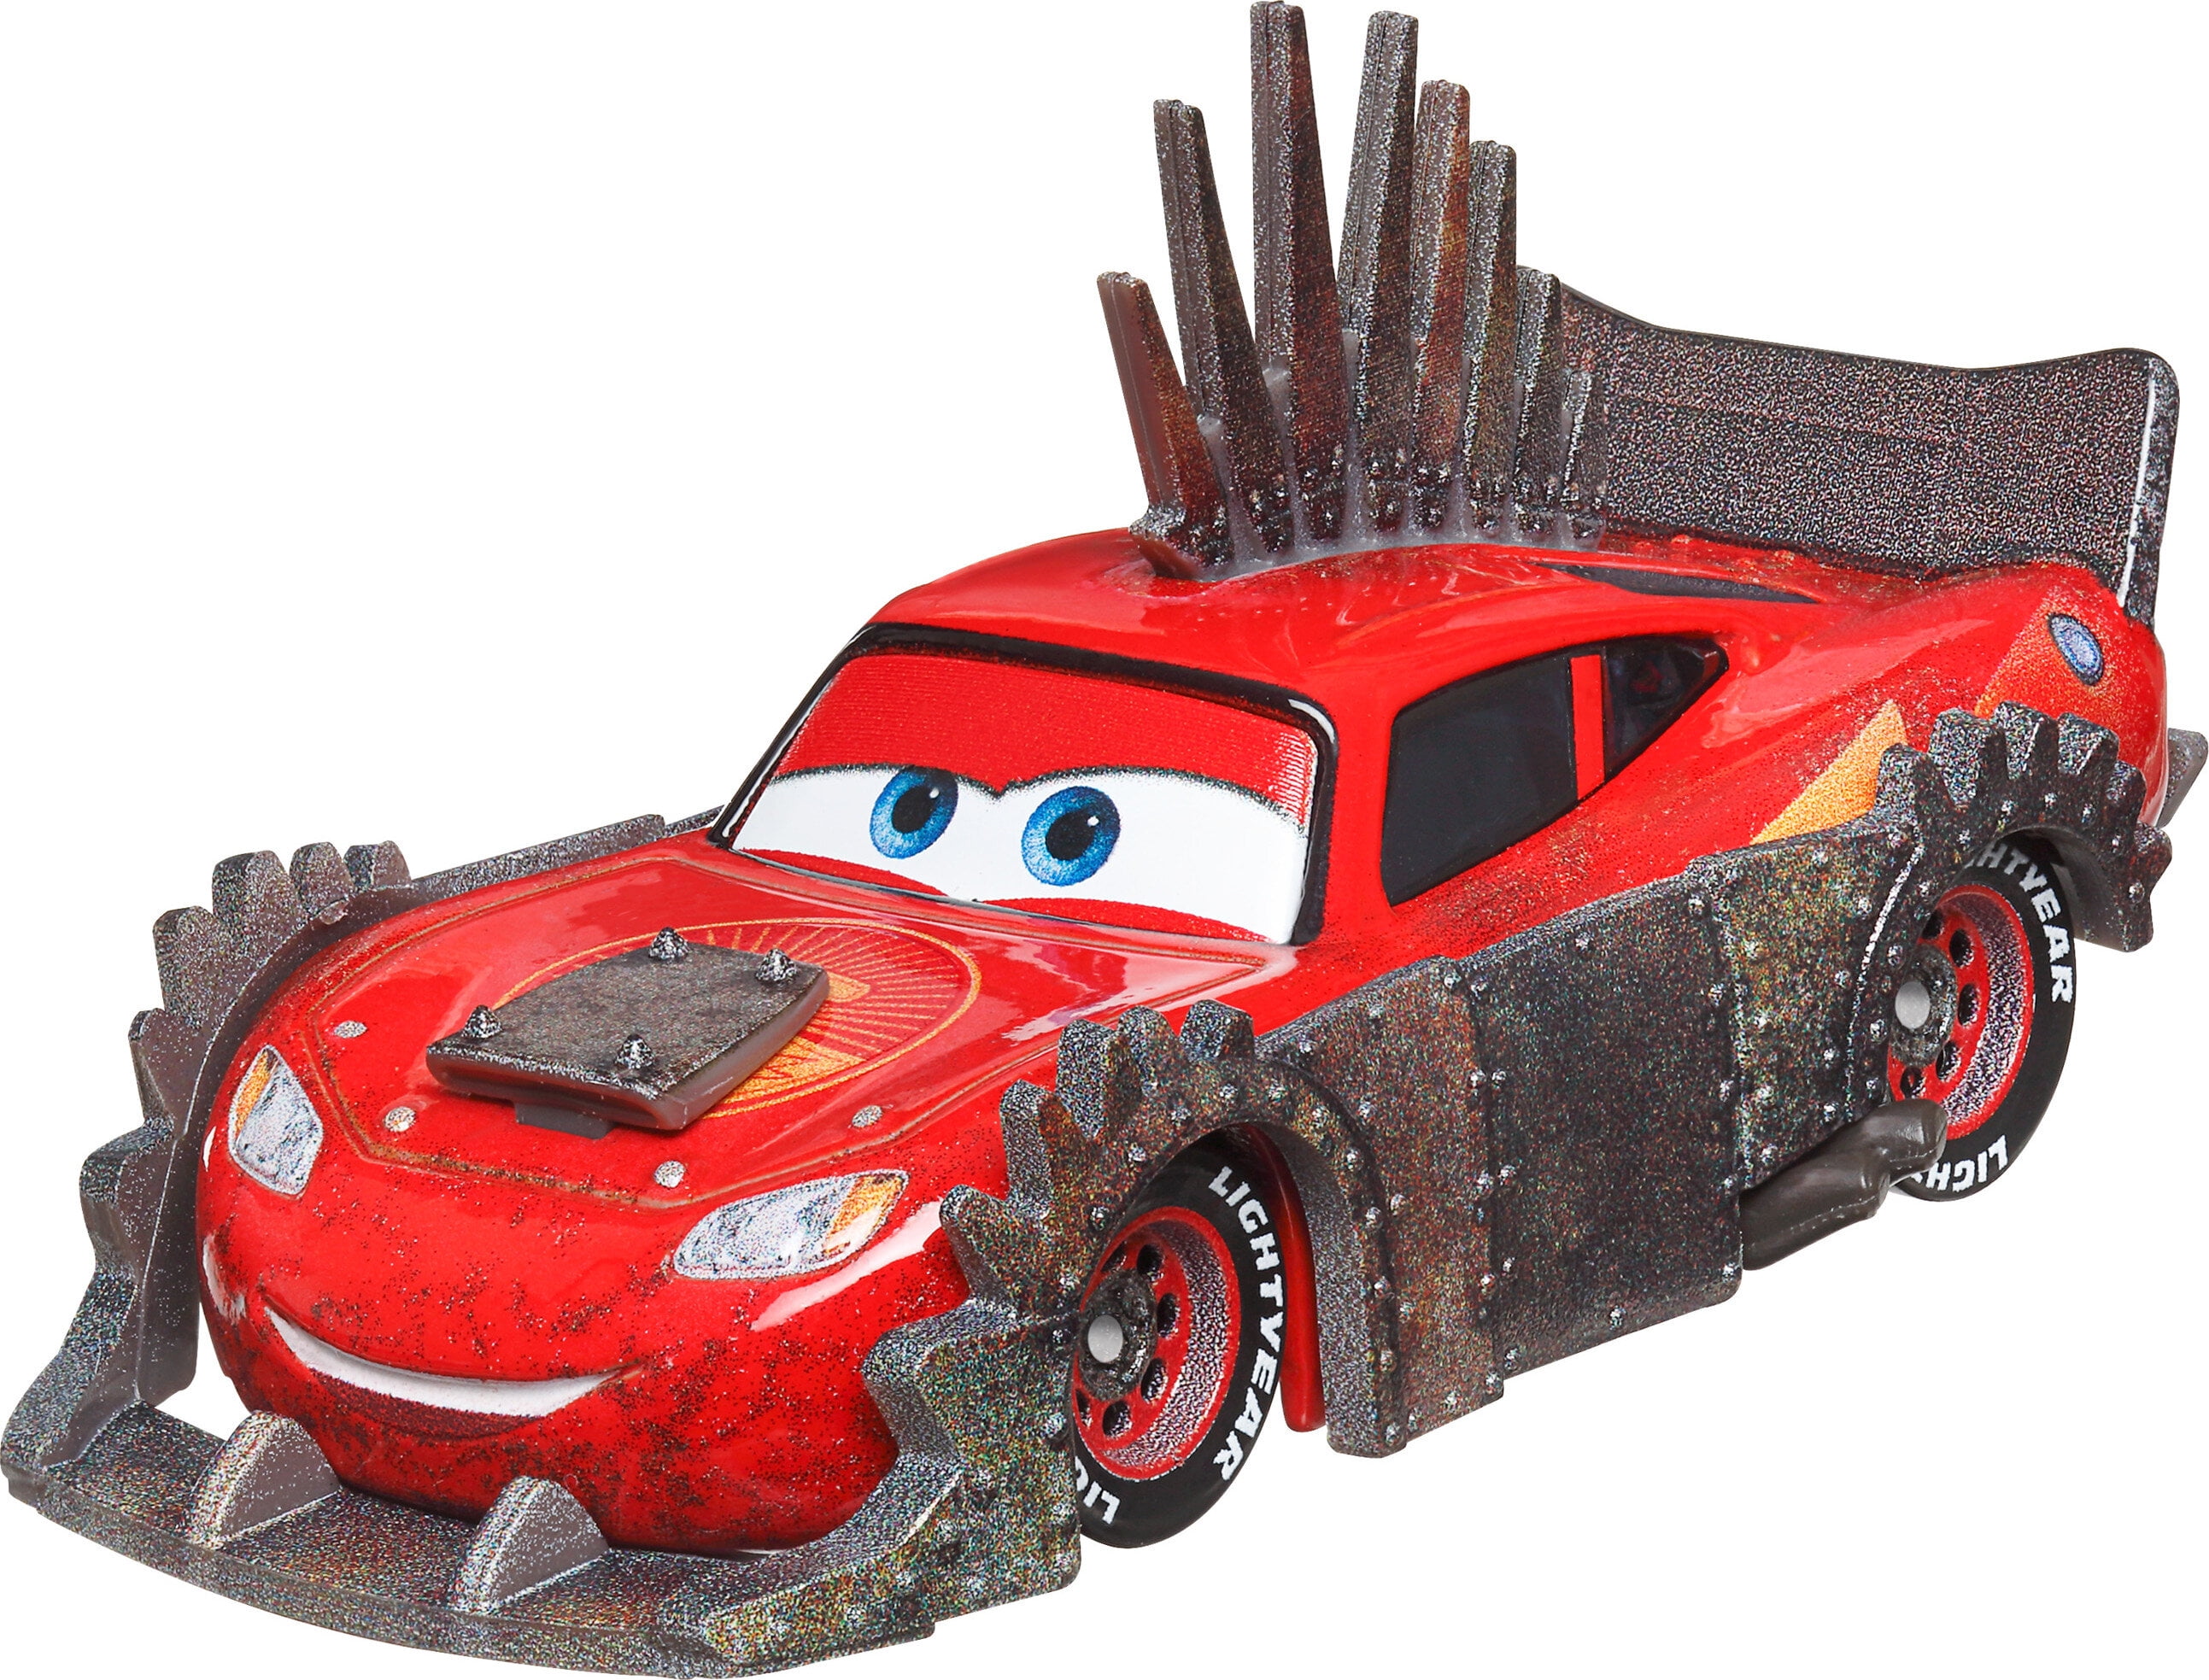  Disney Cars Golden Die-Cast Lightning McQueen 1:55Scale Movie  Character for Racing and Storytelling Fun, Gift for Kids Age 3 Years and  Older : Toys & Games